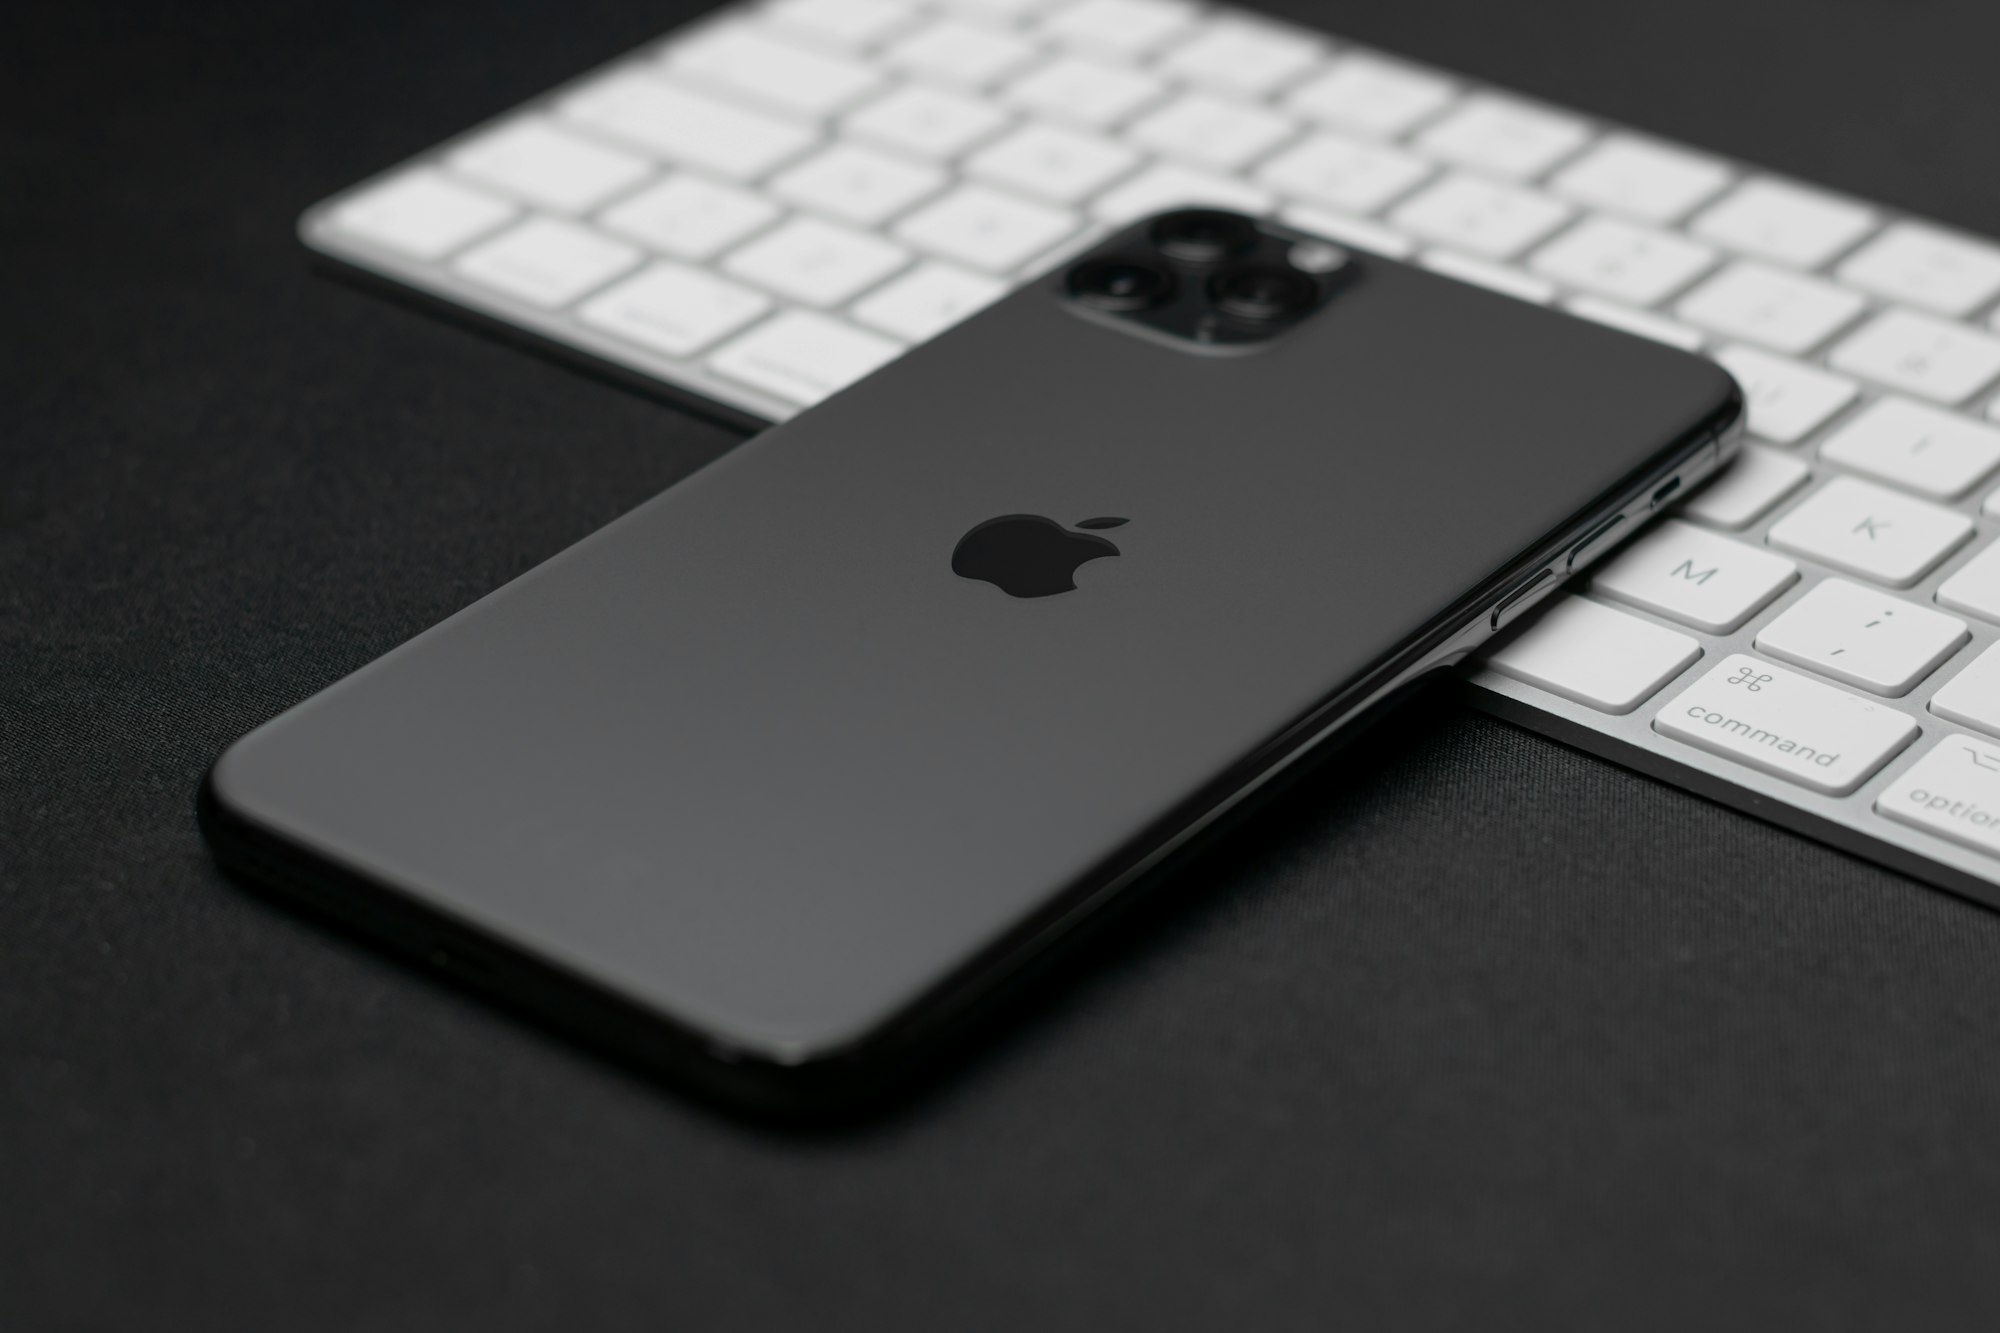 iPhone 11 Pro Max in space gray